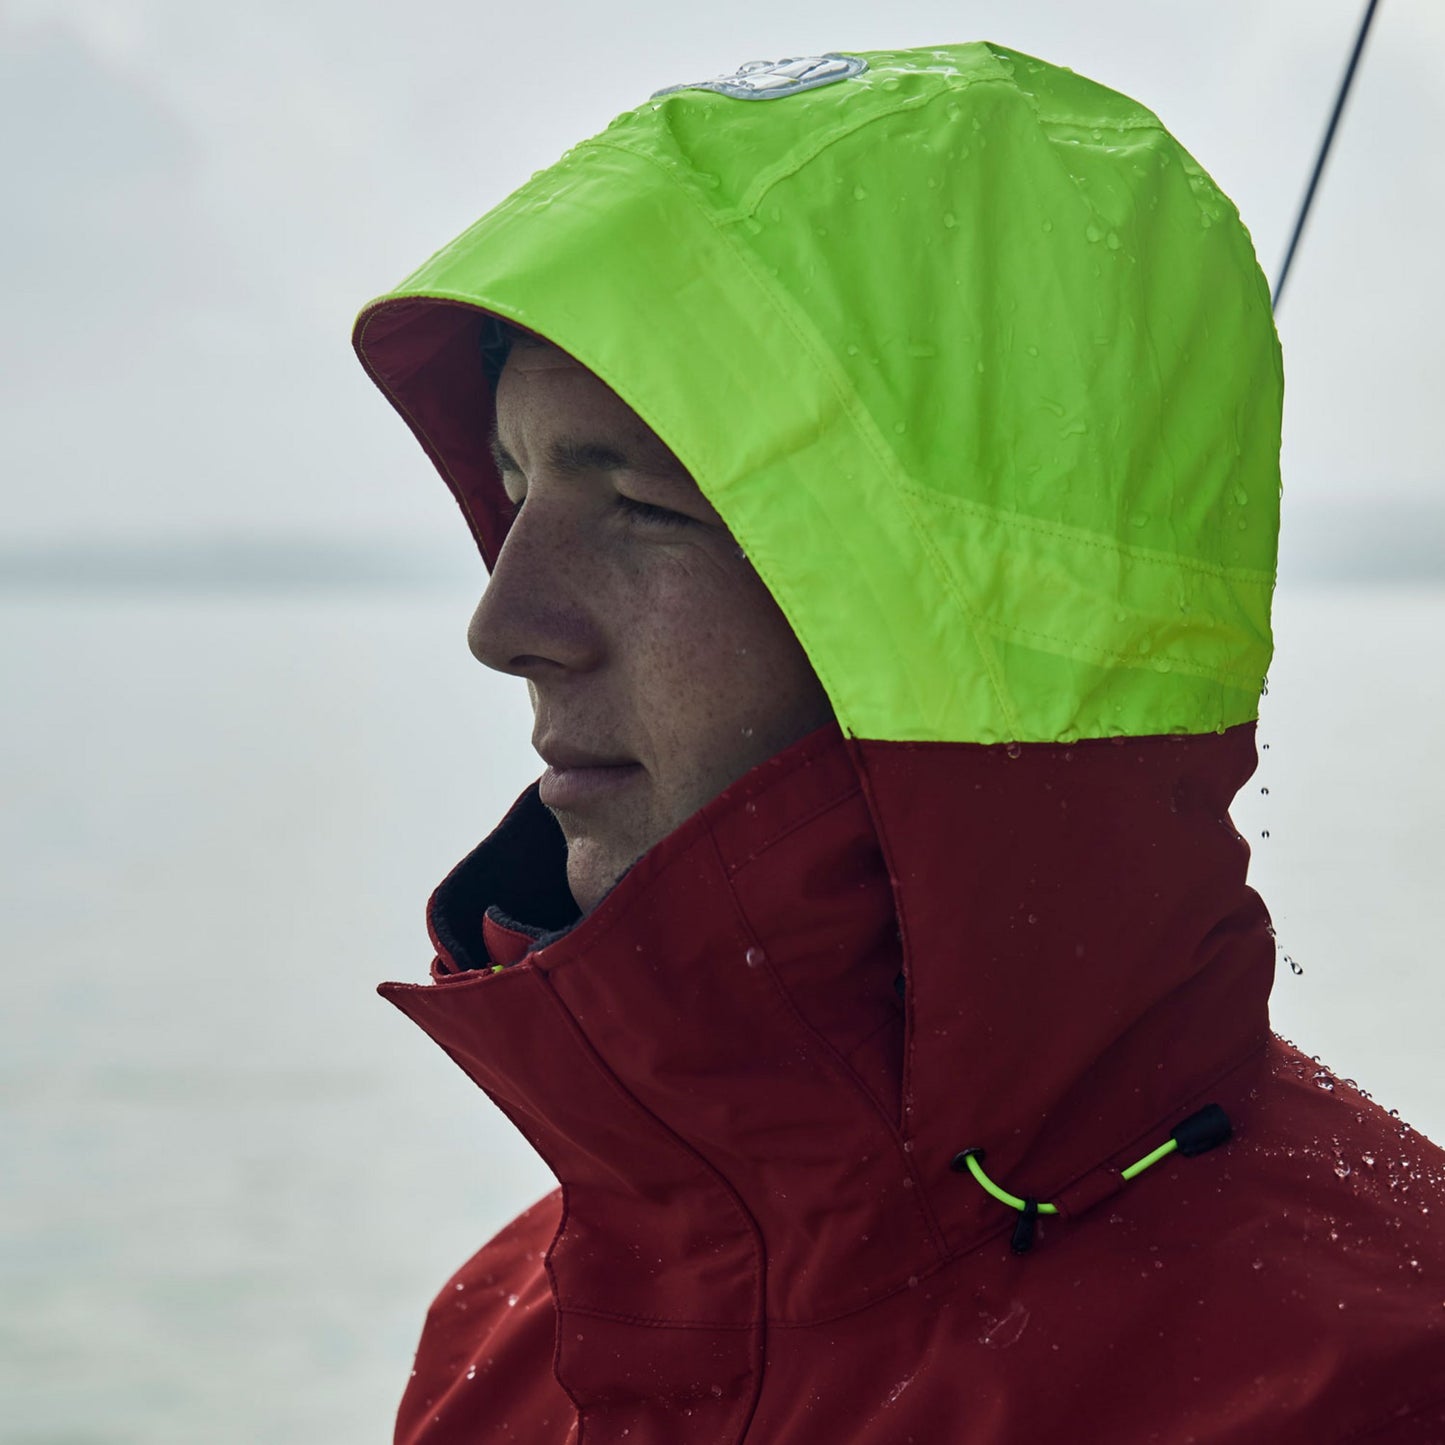 GILL Men's OS2 Offshore Jacket ECO-RESPONSIBLE